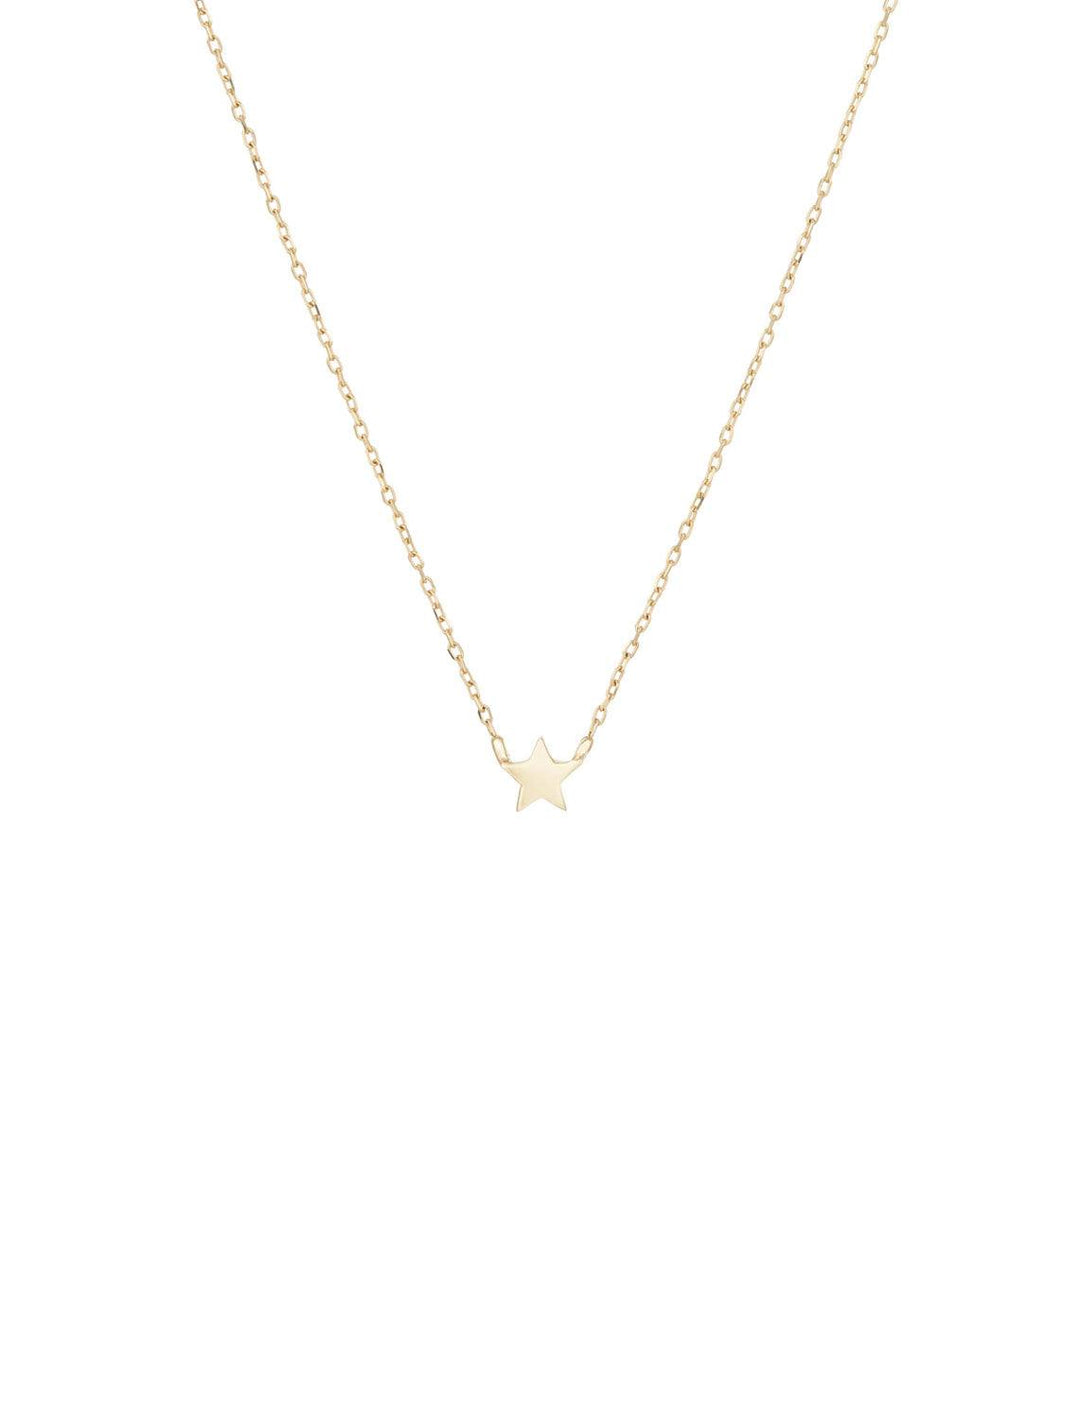 super tiny puffy star necklace in gold